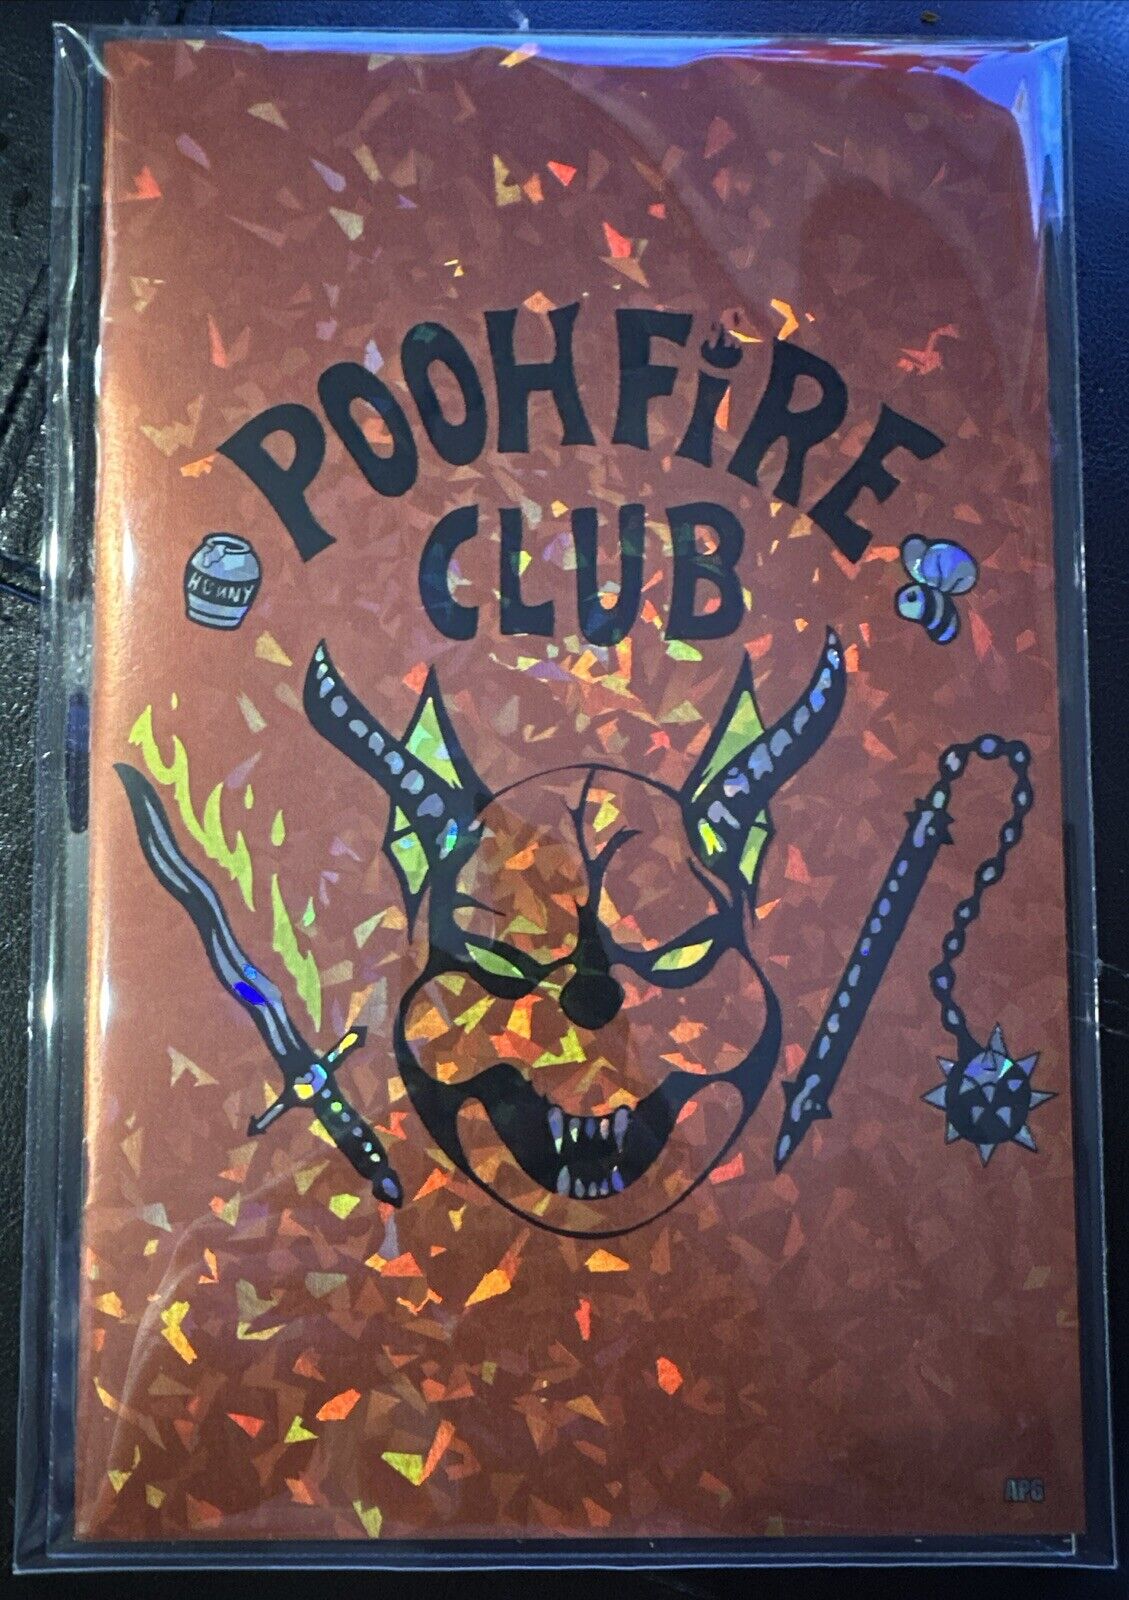 Do You Pooh - PoohFire Club - Red Crystal Foil- AP6 - Stranger Things Homage